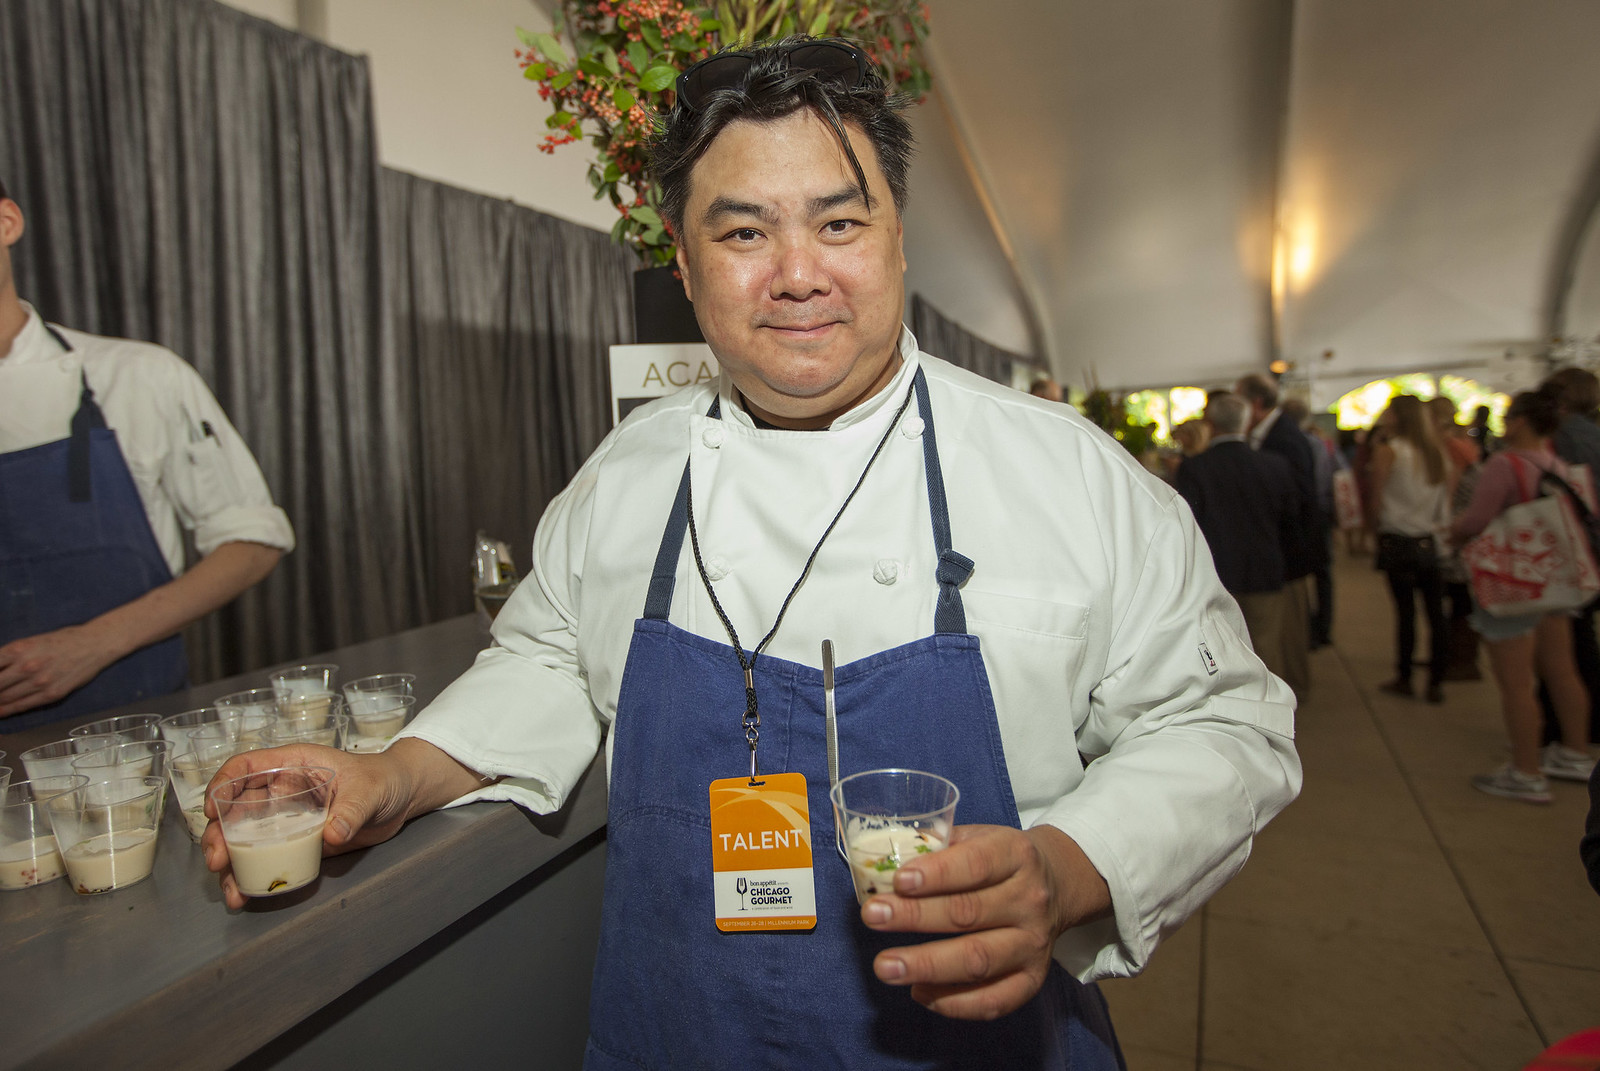 A chef poses with an apron and drinks in his hands.